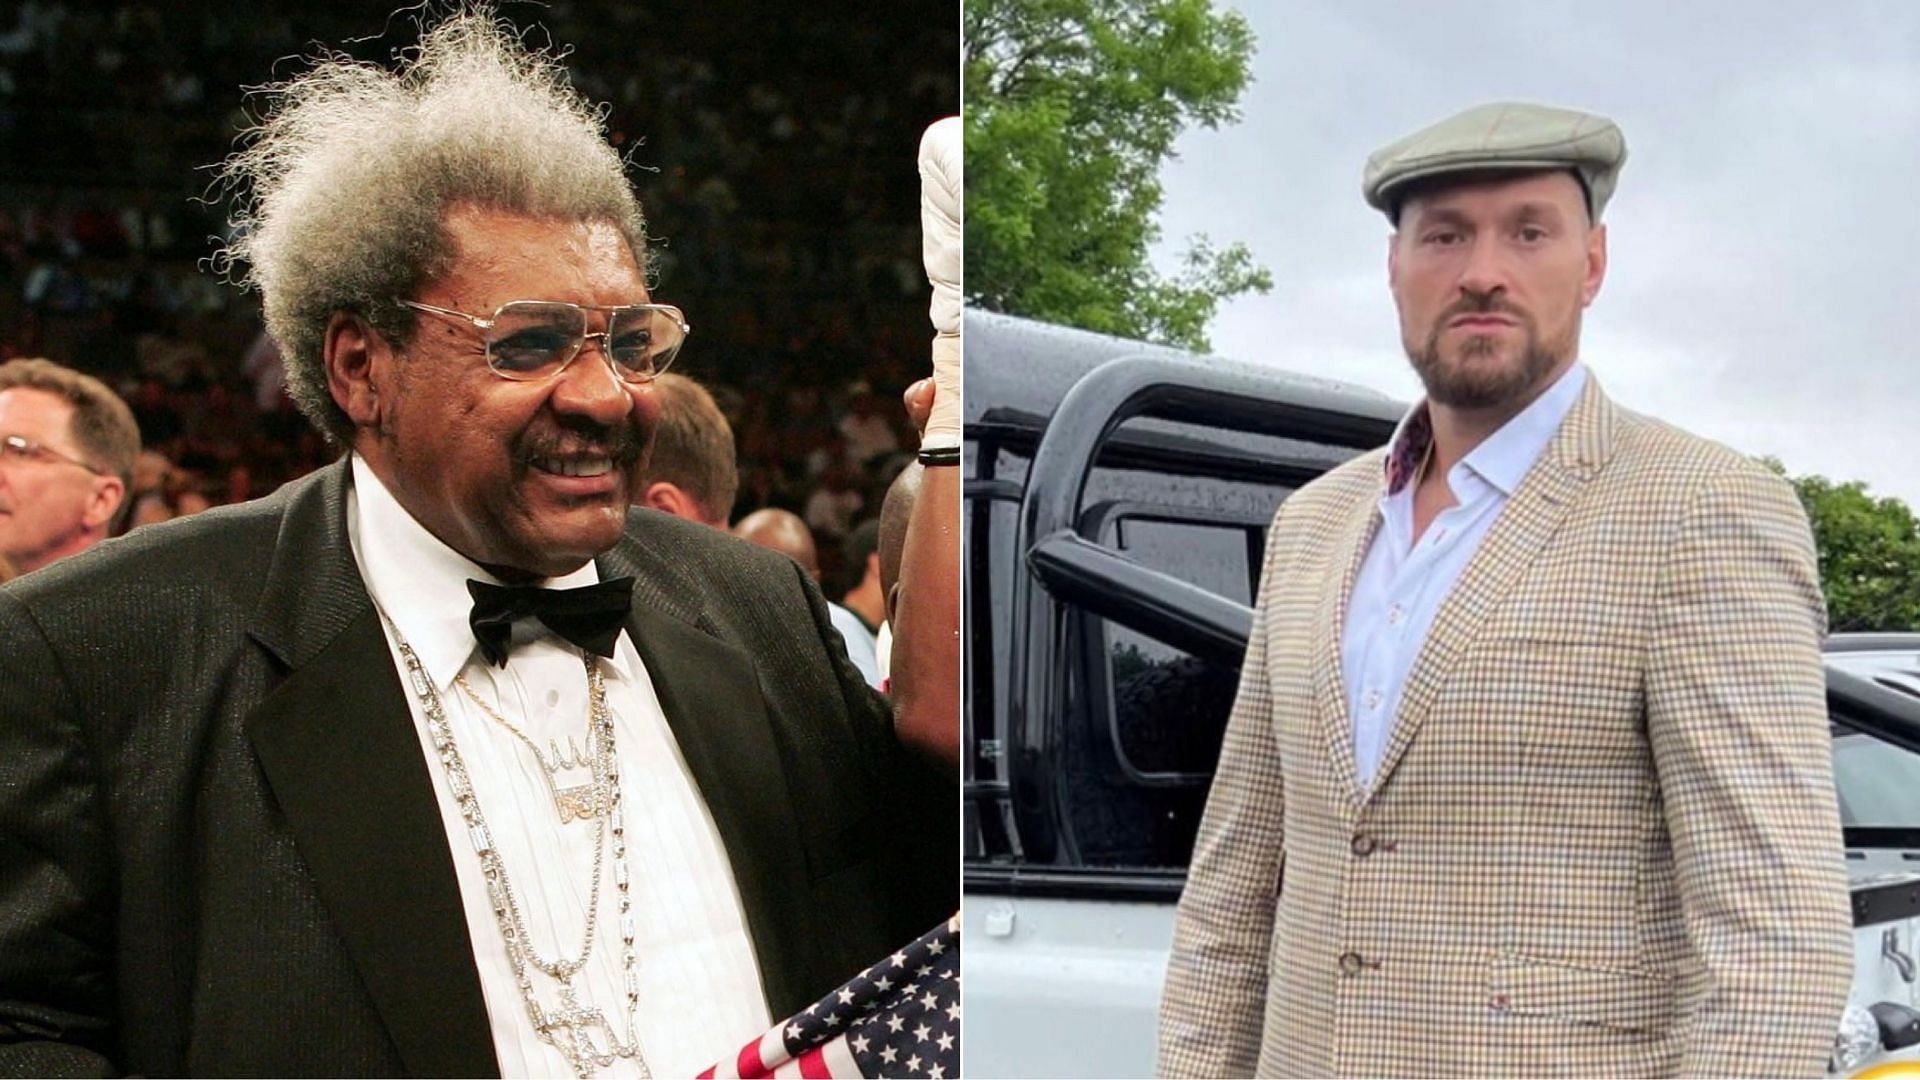 Don King (left, via Getty), Tyson Fury (right, @tysonfury) [Images courtesy of Getty and Instagram]